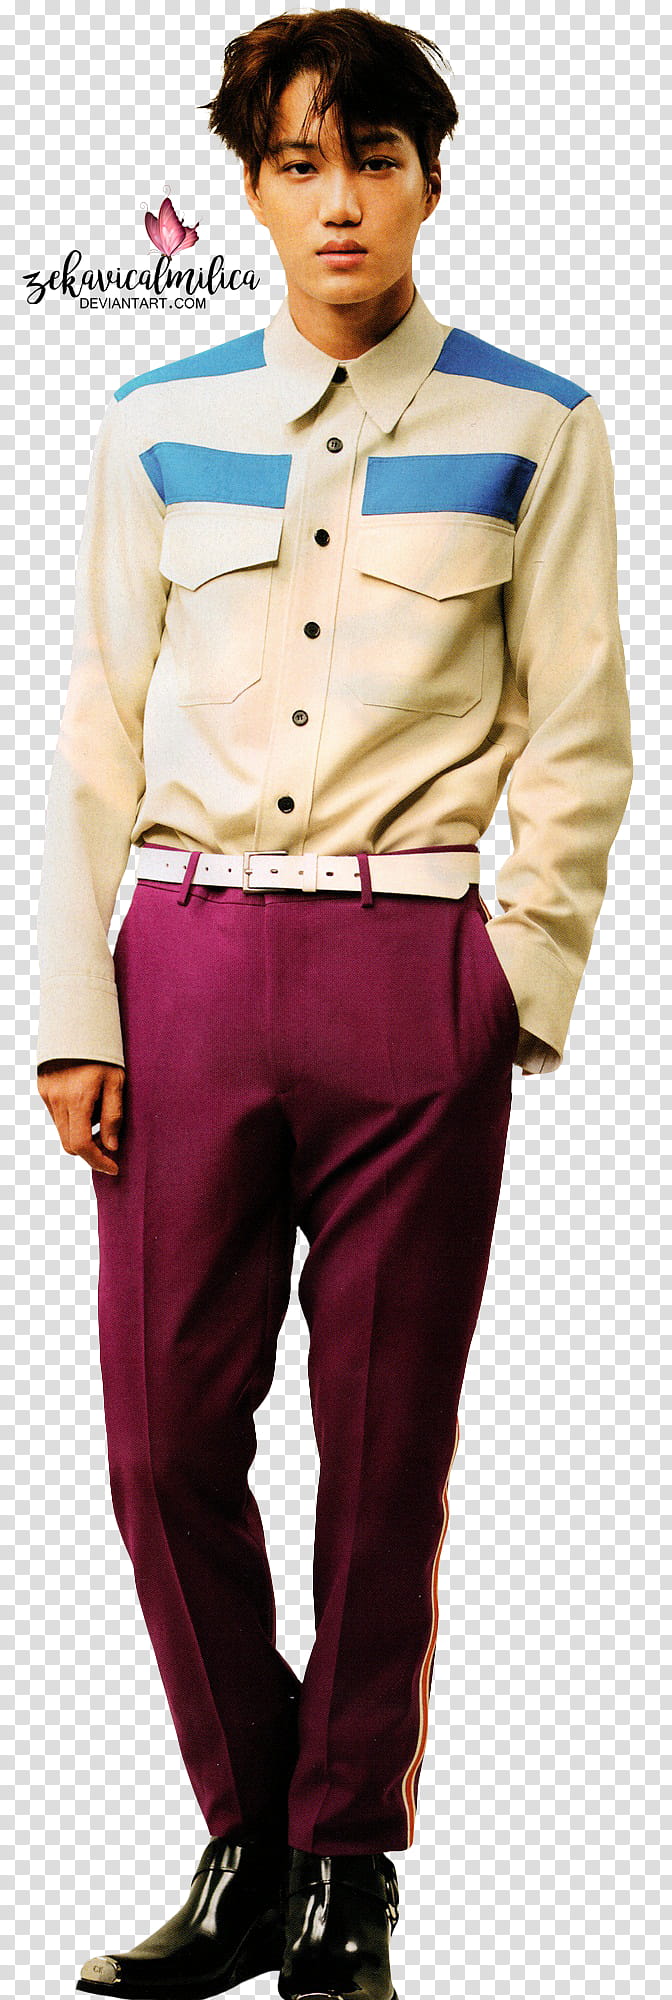 EXO Kai Lined, man in white long-sleeved shirt and maroon dress pants transparent background PNG clipart